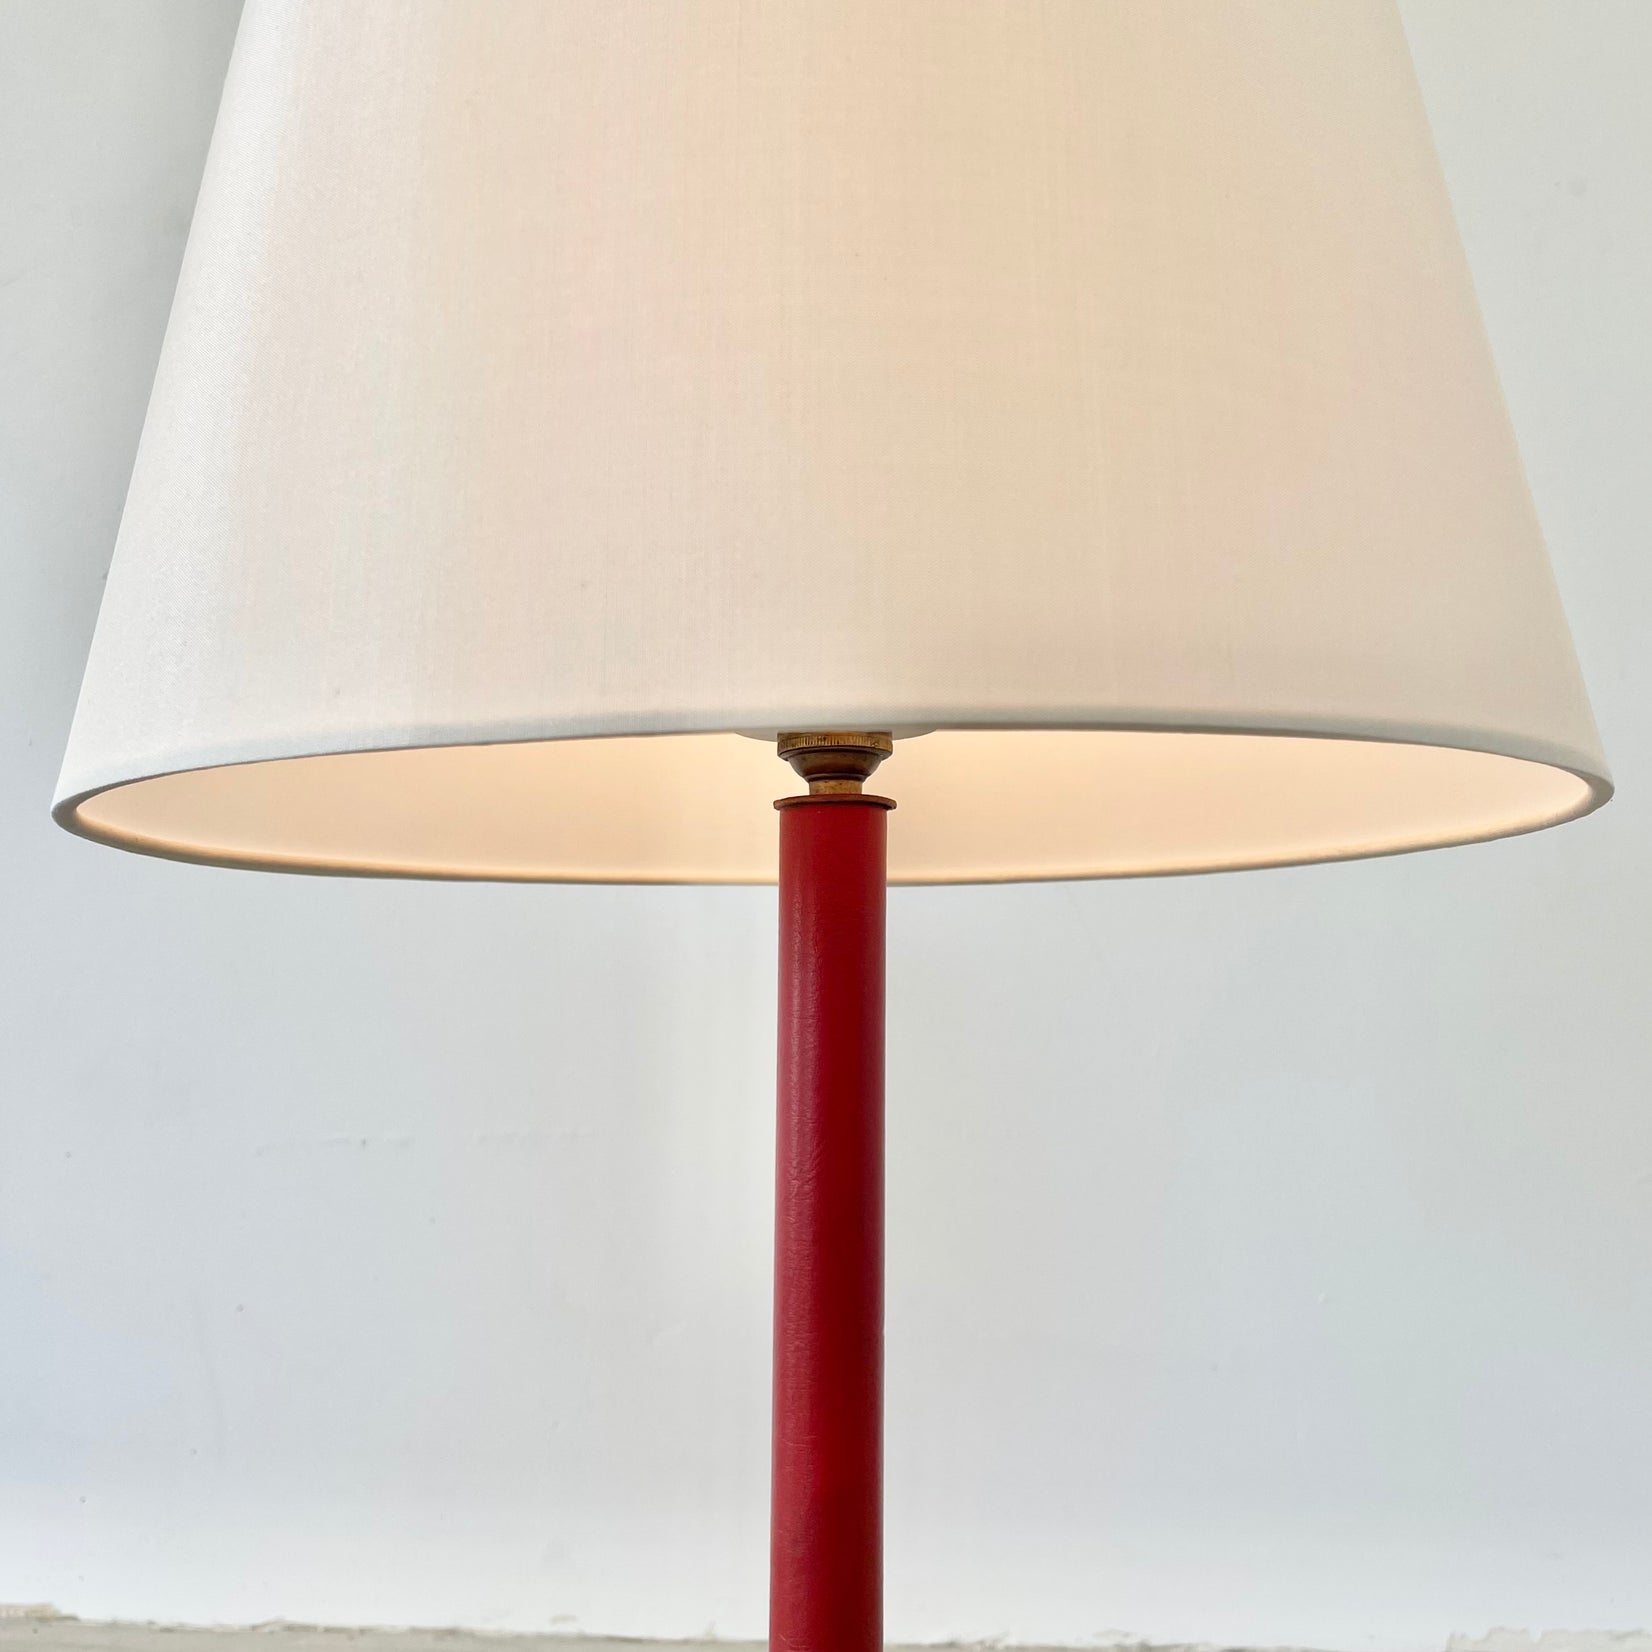 Jacques Adnet Red Leather Table Lamp, 1950s France